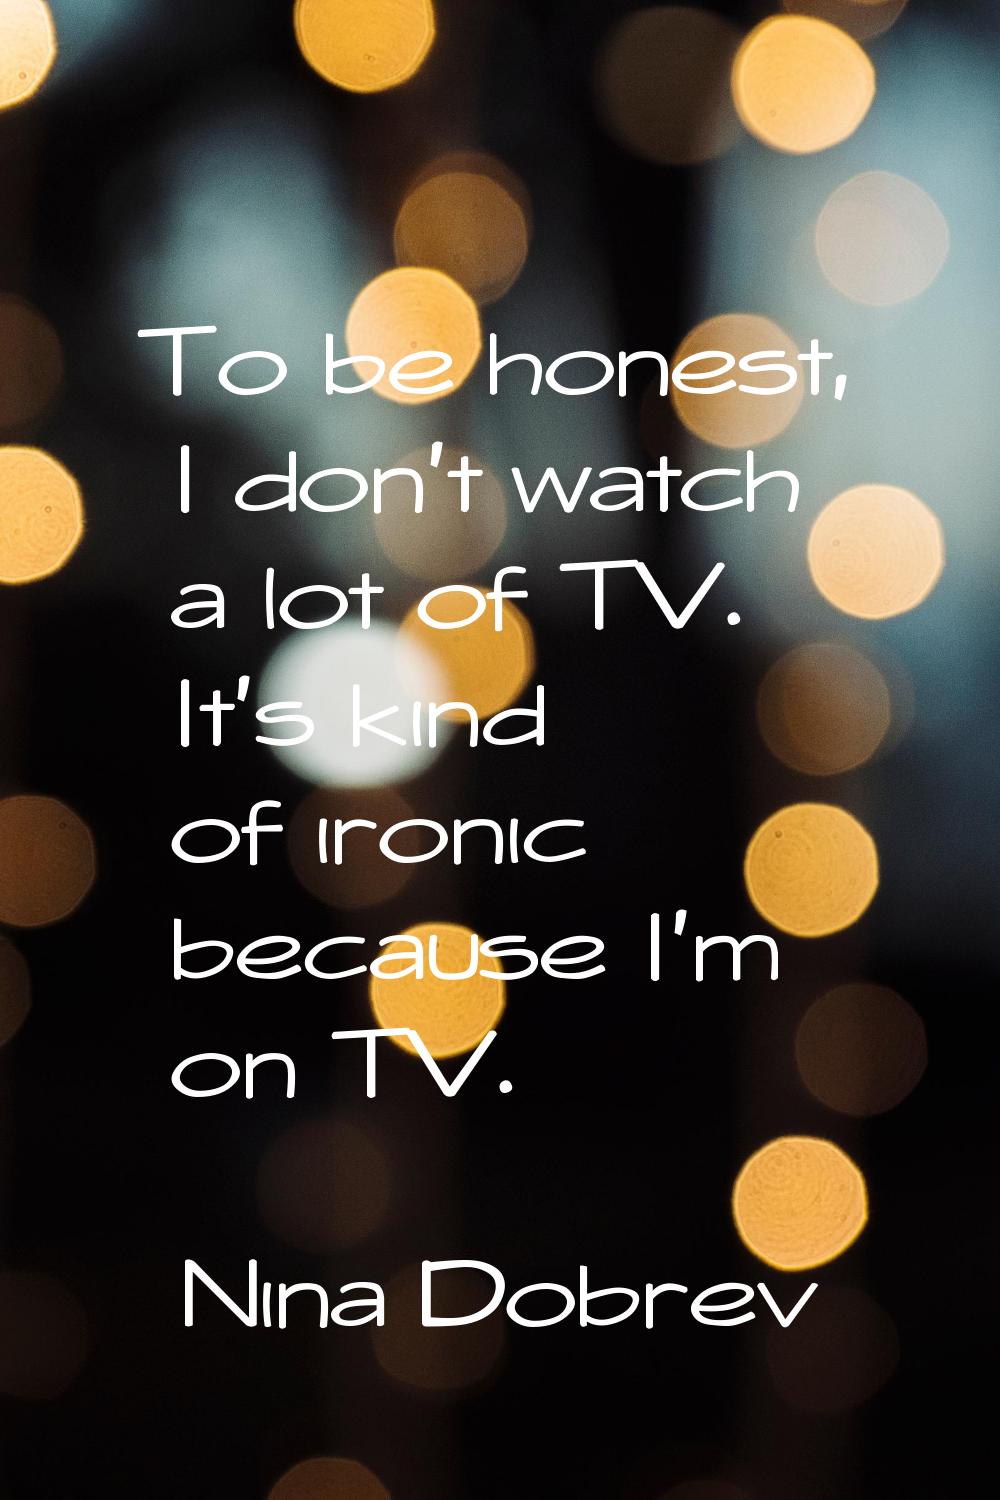 To be honest, I don't watch a lot of TV. It's kind of ironic because I'm on TV.